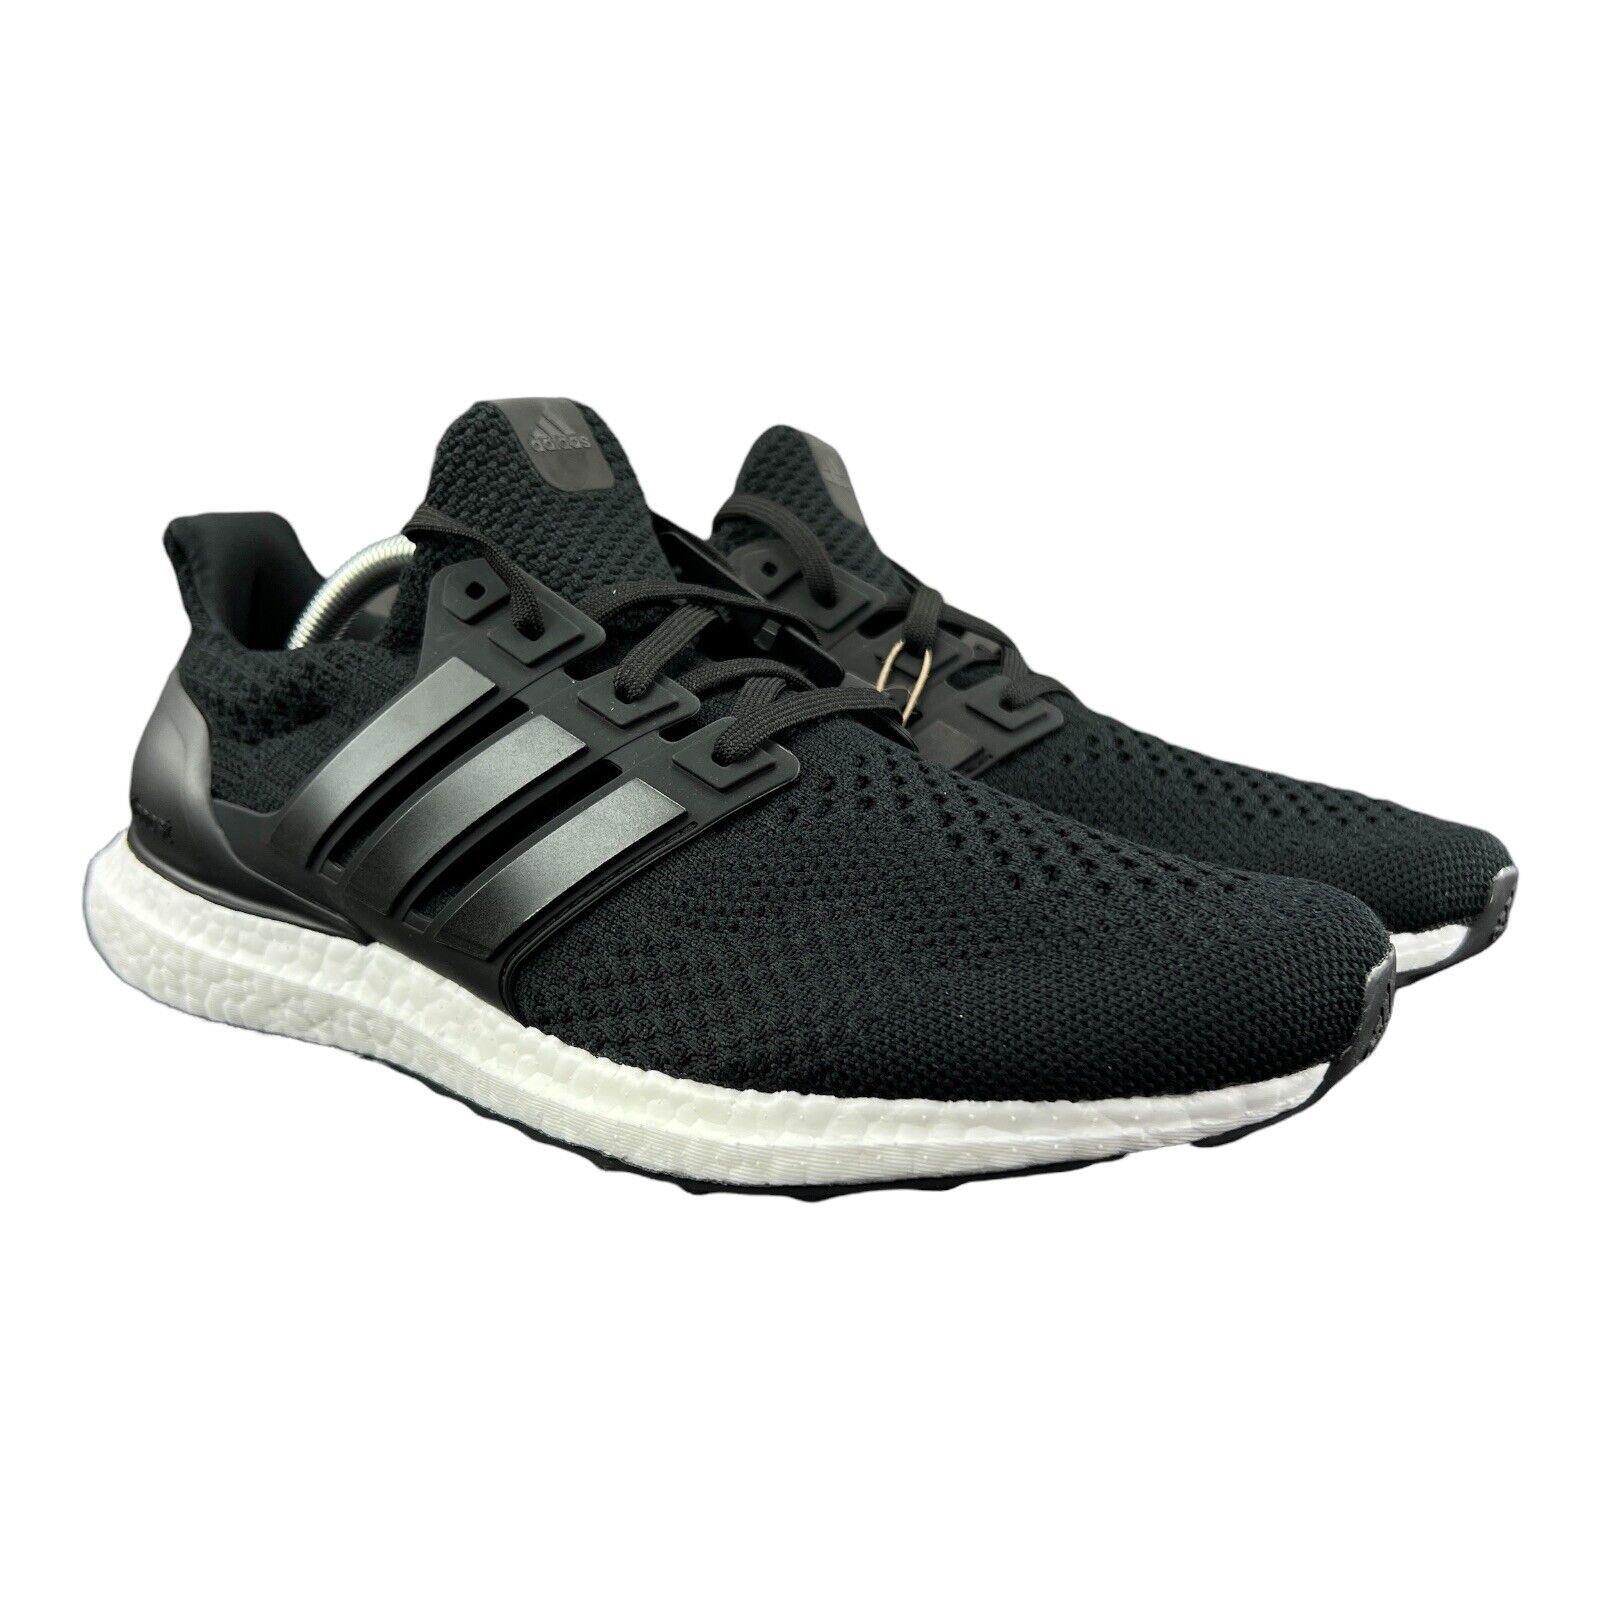 Adidas shoes UltraBoost DNA - Black 2